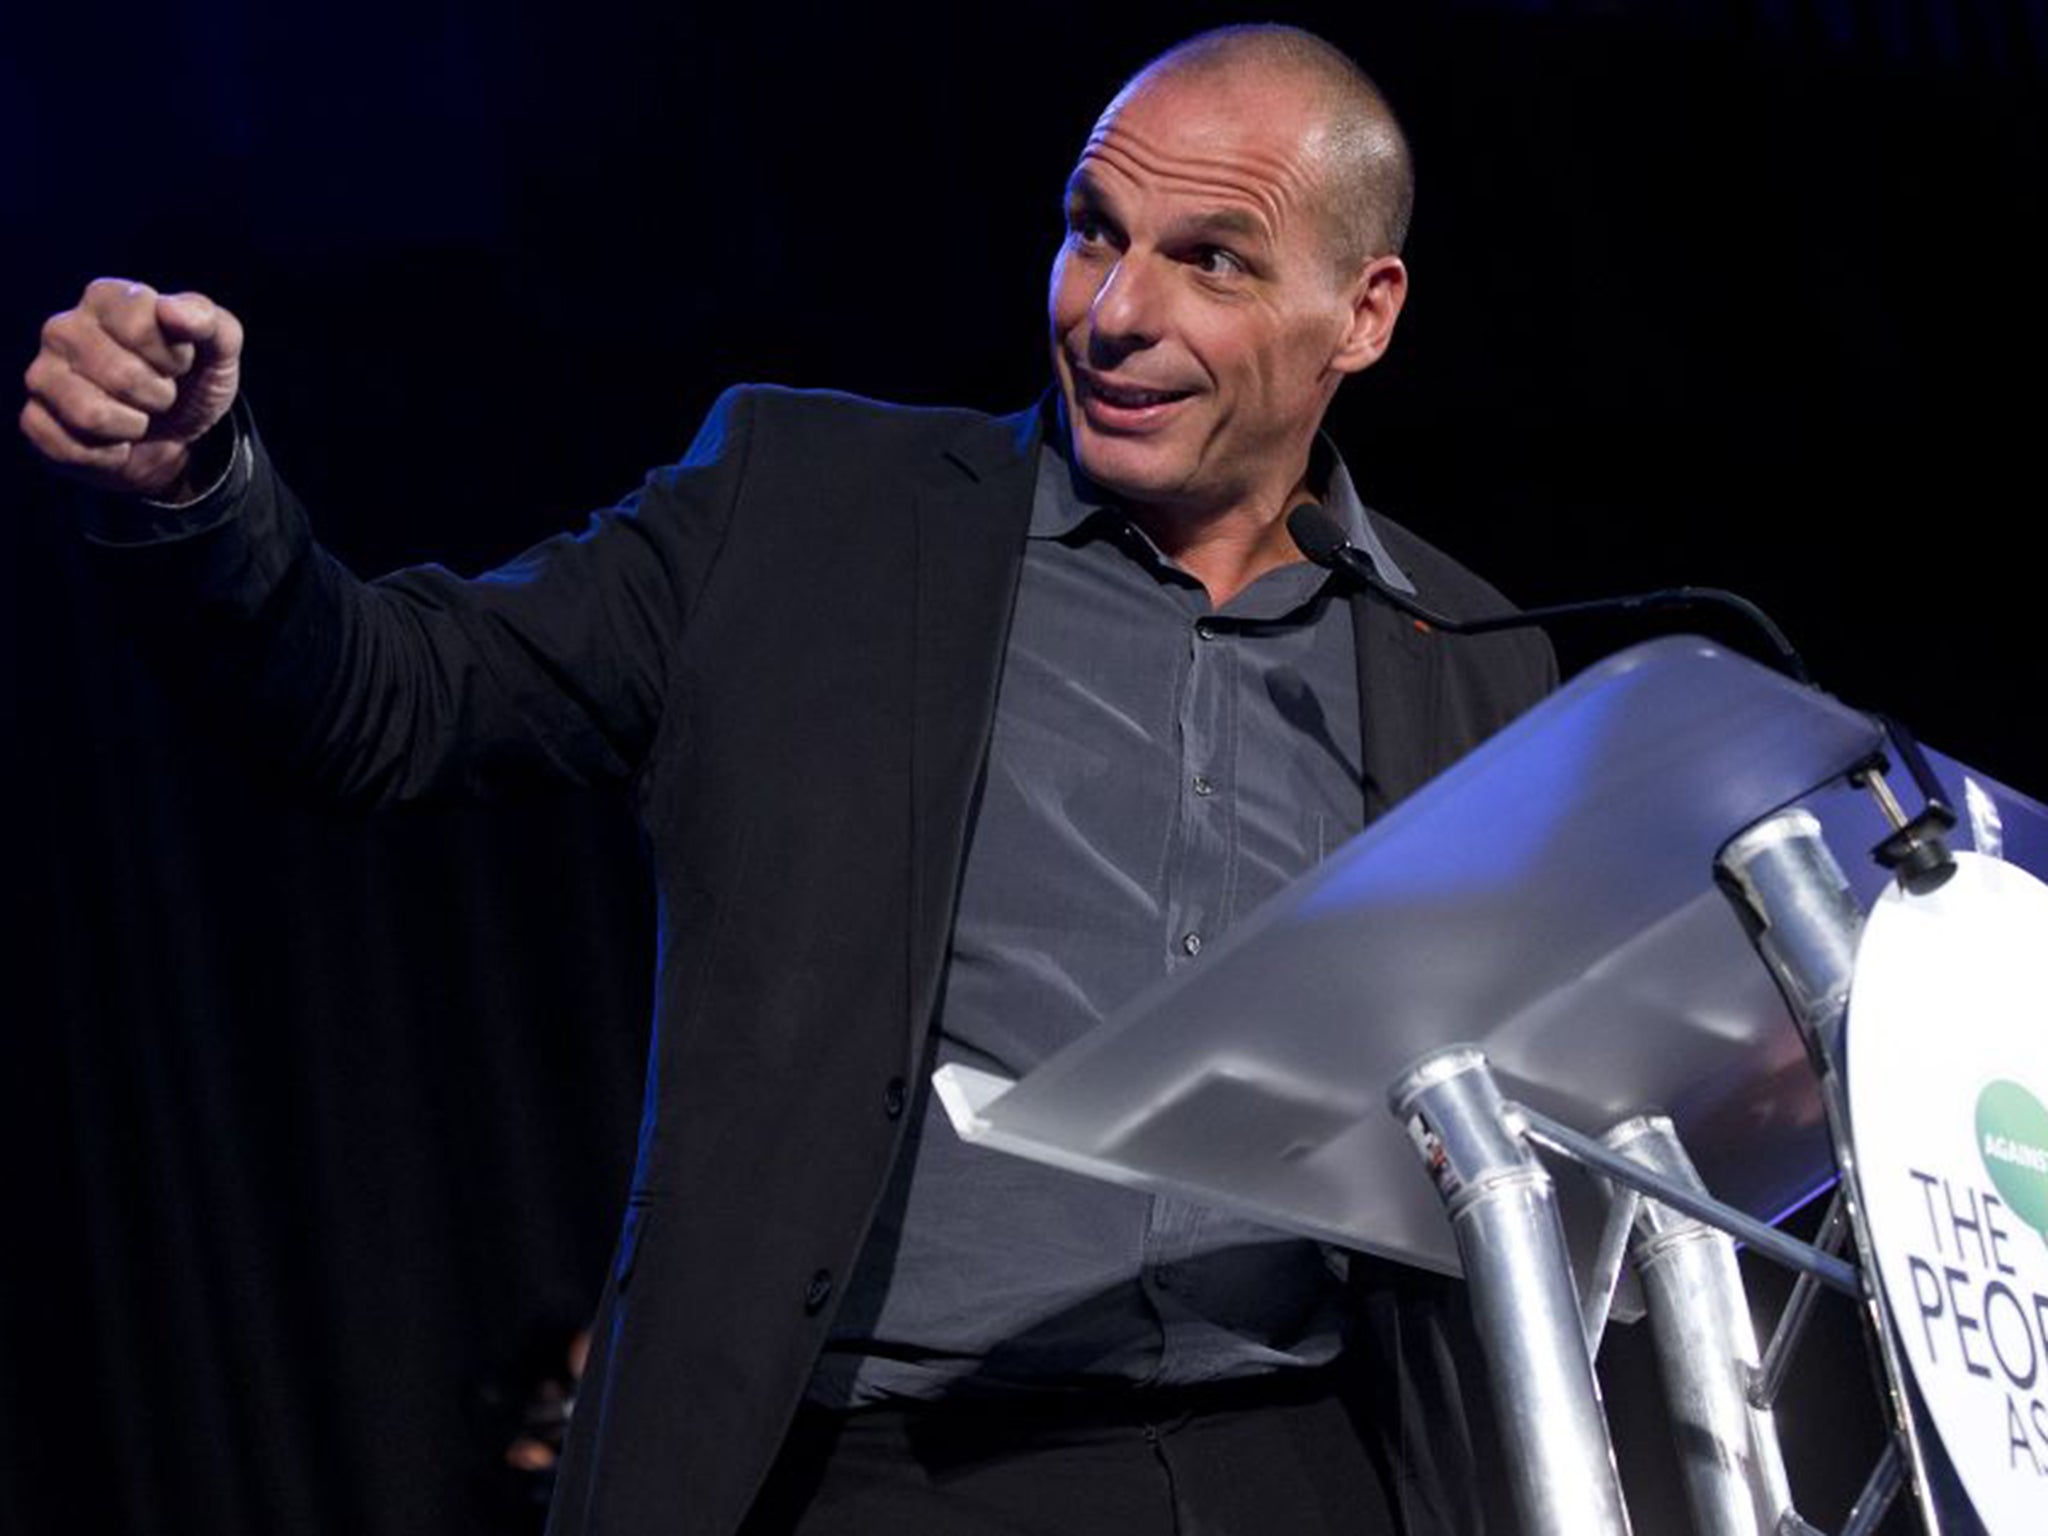 Former Greek finance minister, Yanis Varoufakis, was speaking at a meeting of The People's Assembly in London on Monday